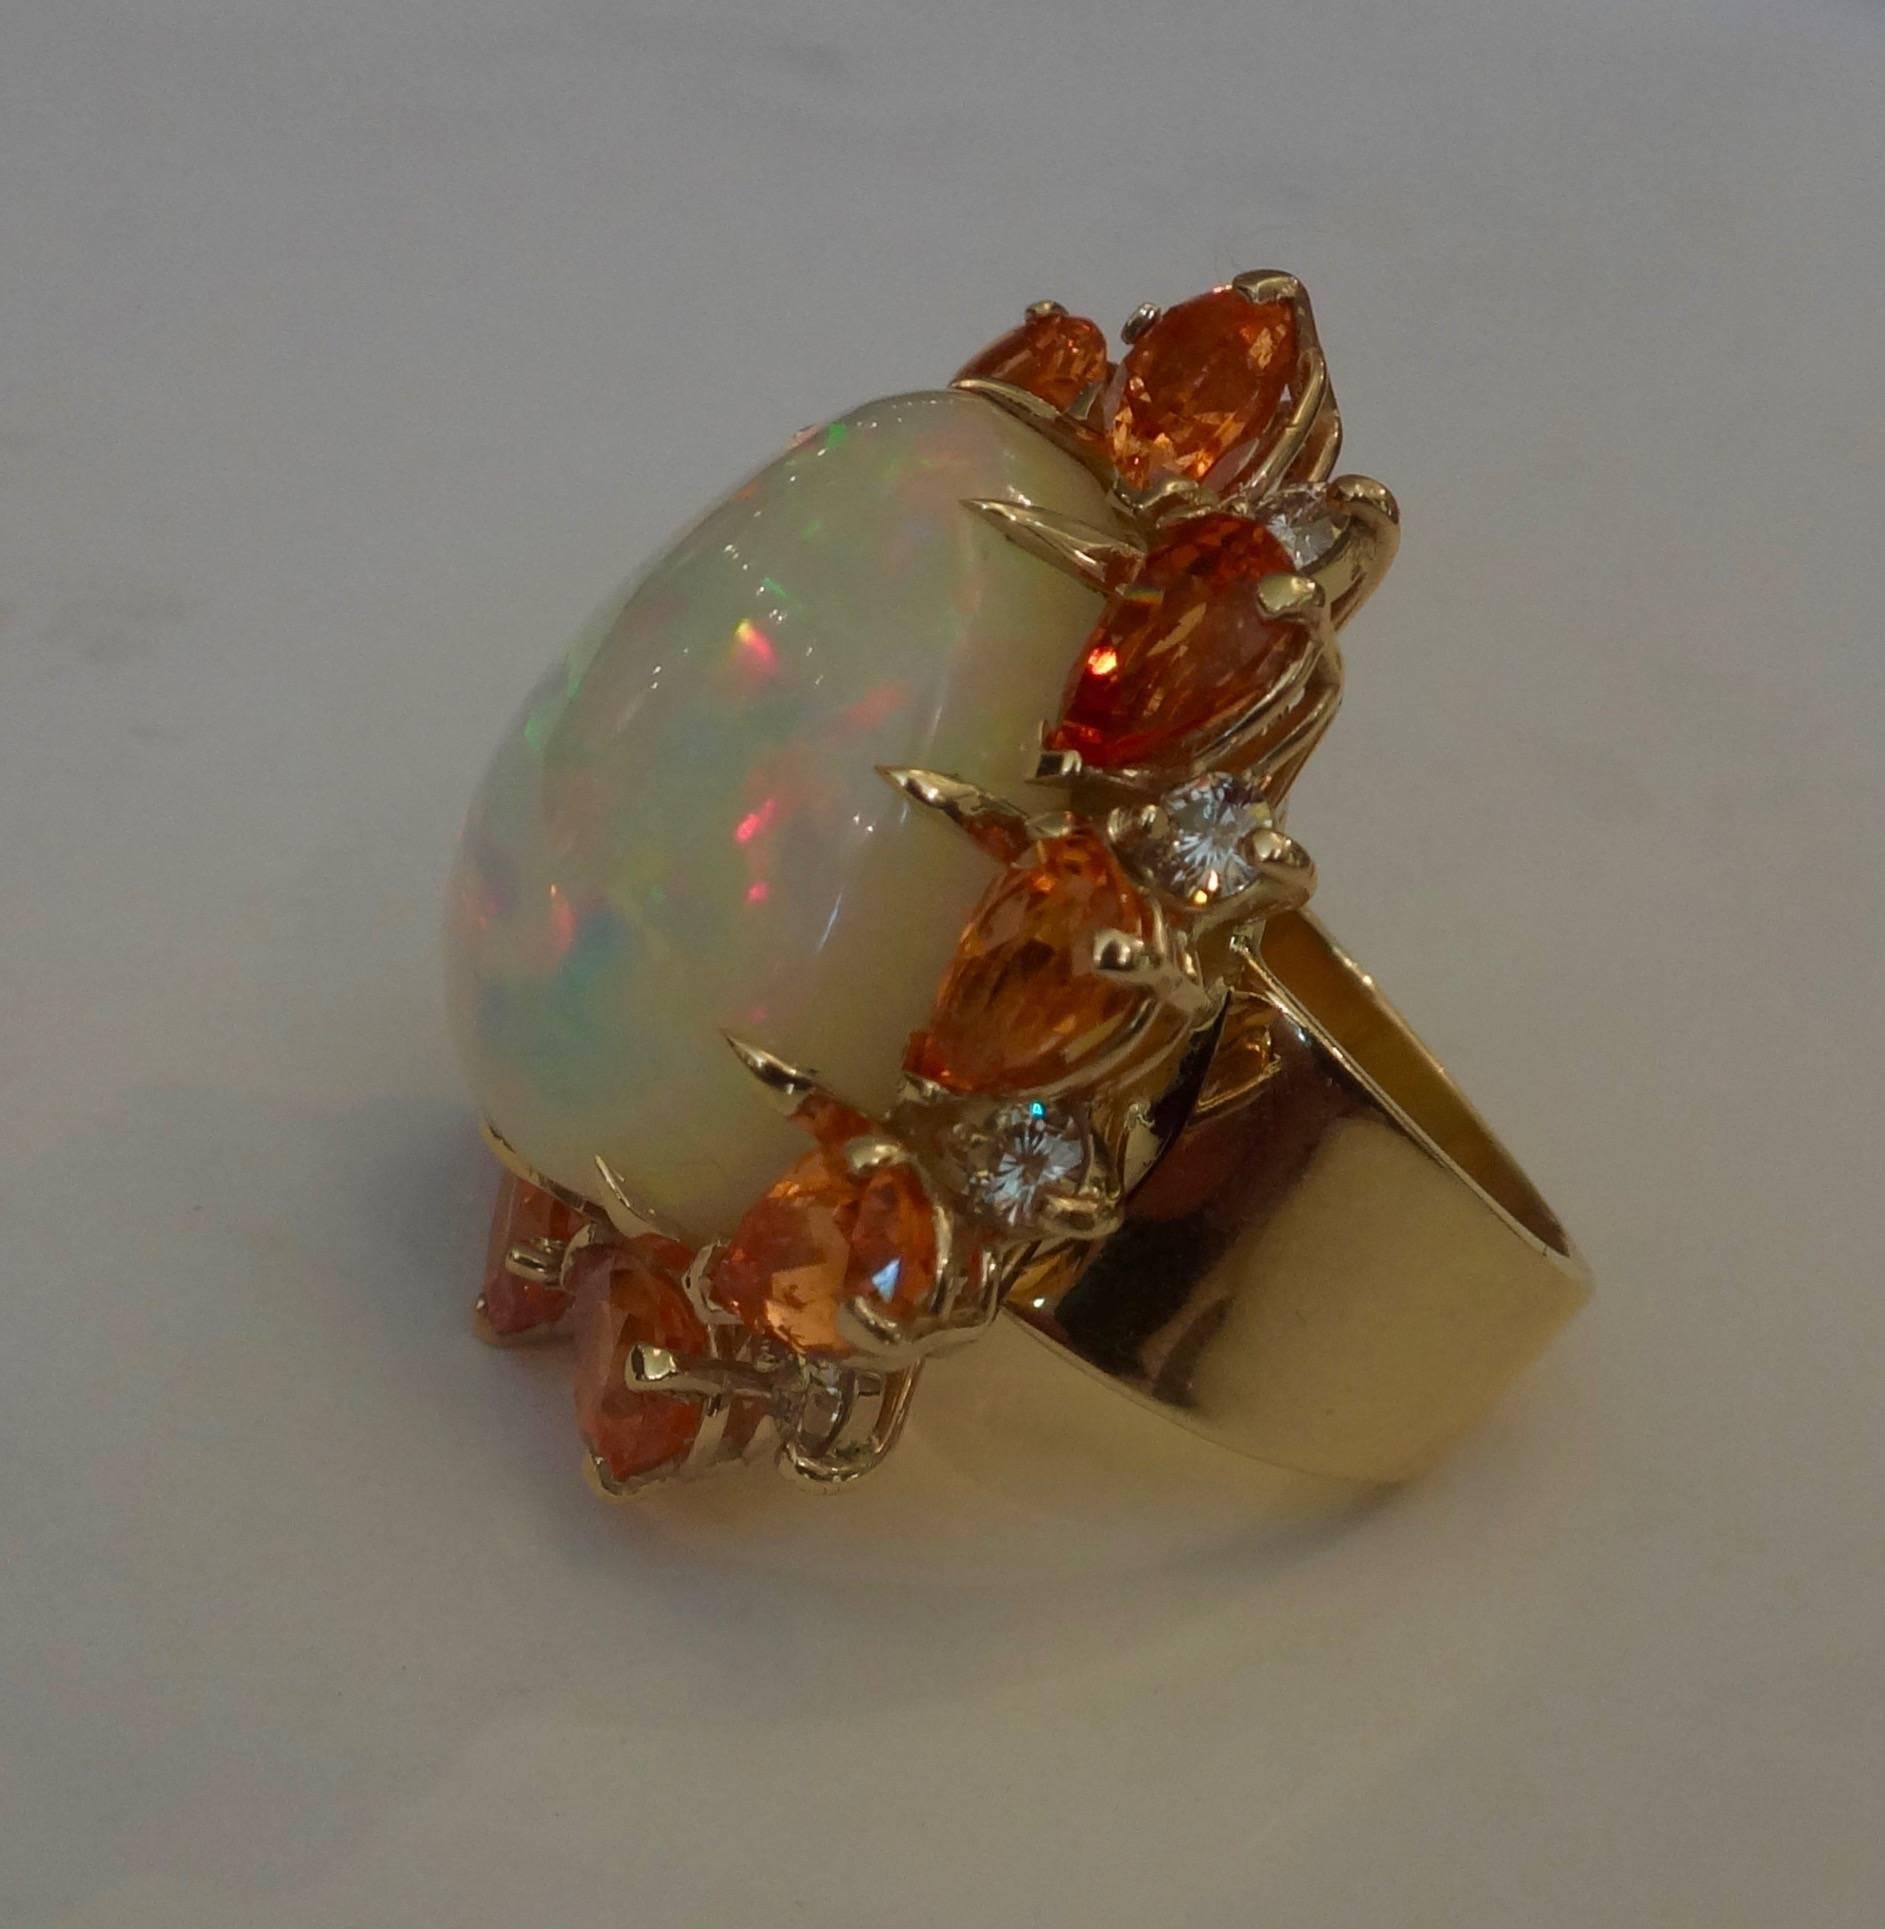 One-of-a-kind pear shaped Ethiopian opal of 25.94 carats, white crystal body with a full range of intense colors is surrounded by 10 pear shaped spessertite garnets (10 at 10.14 carats) and 10 diamonds (10 at 1.01 carats).  Hand fabricated 18k